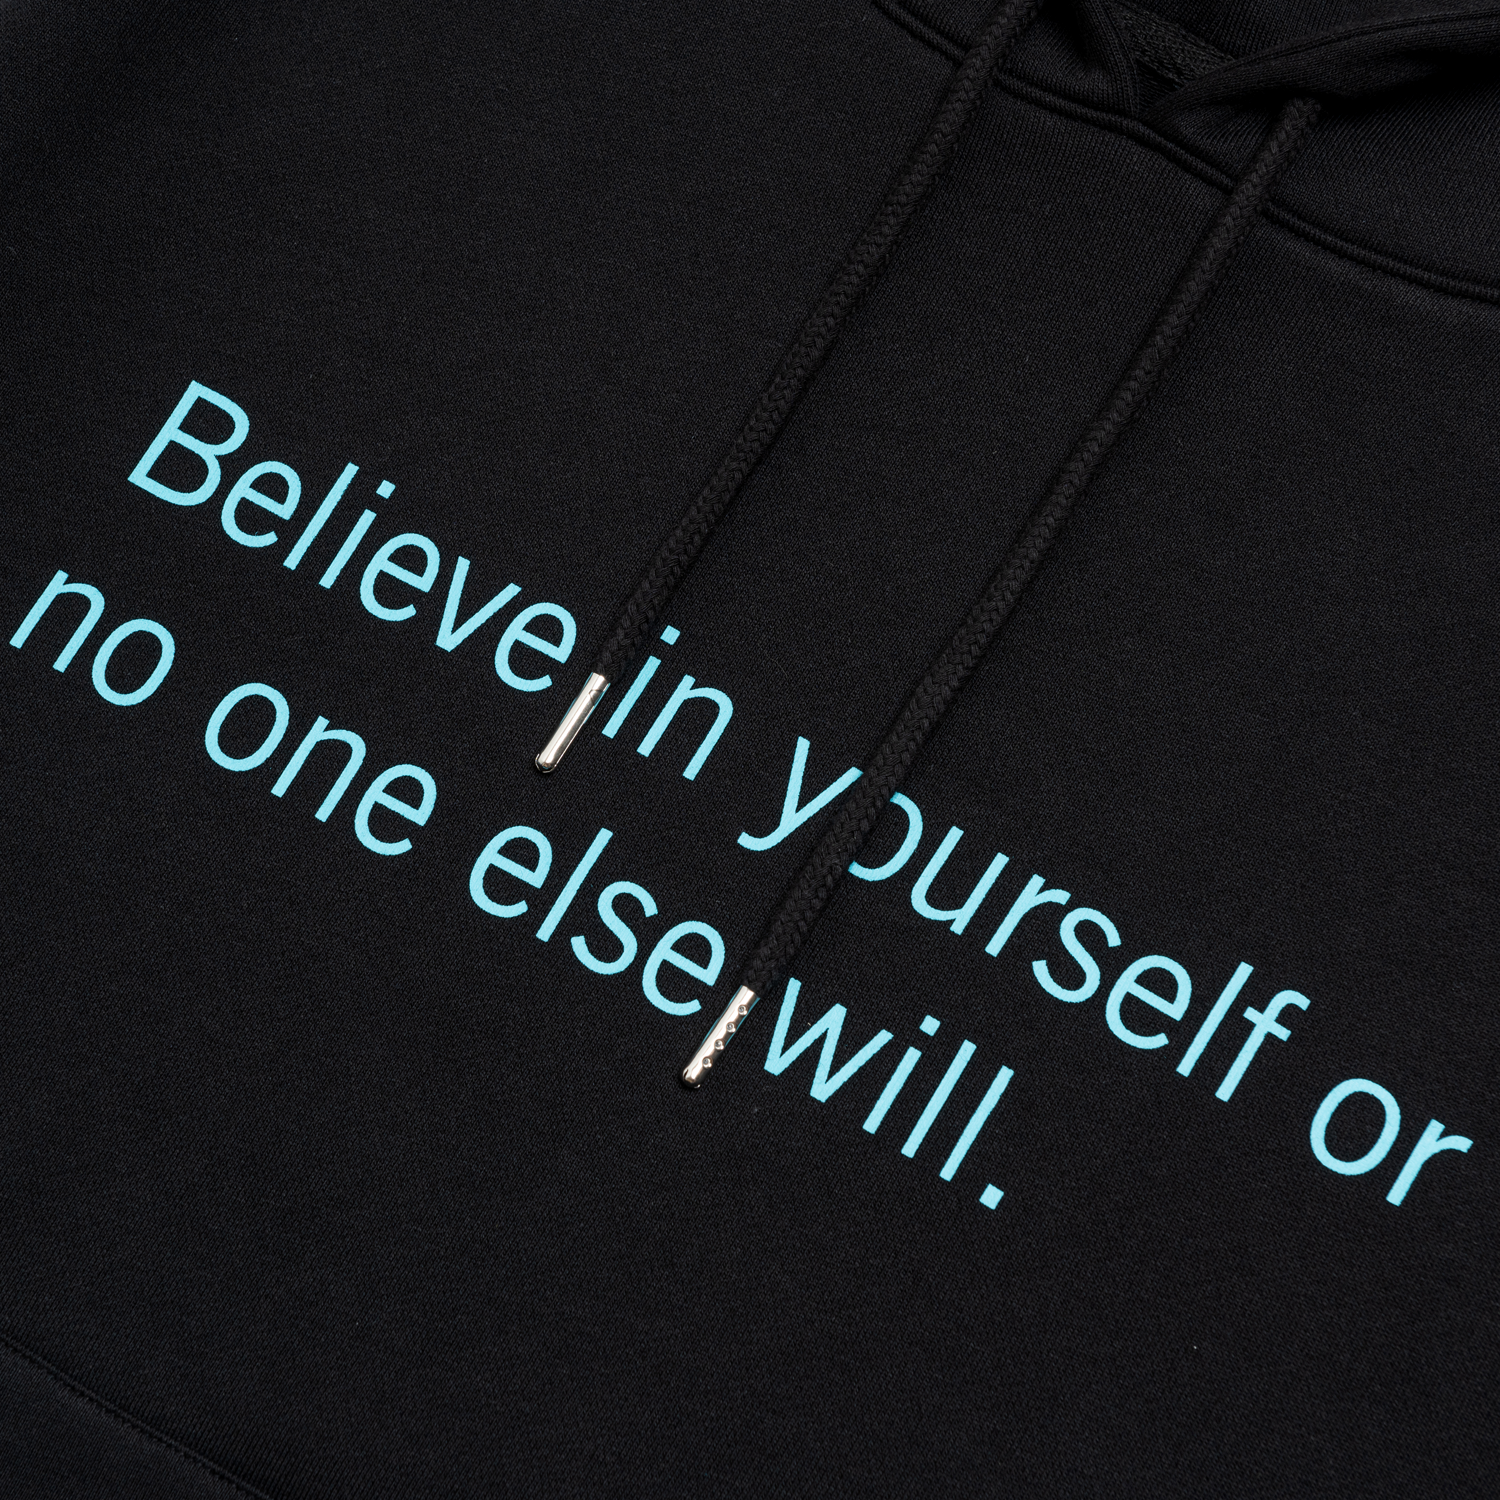 THE CLONE WARS QUOTE HOODIE